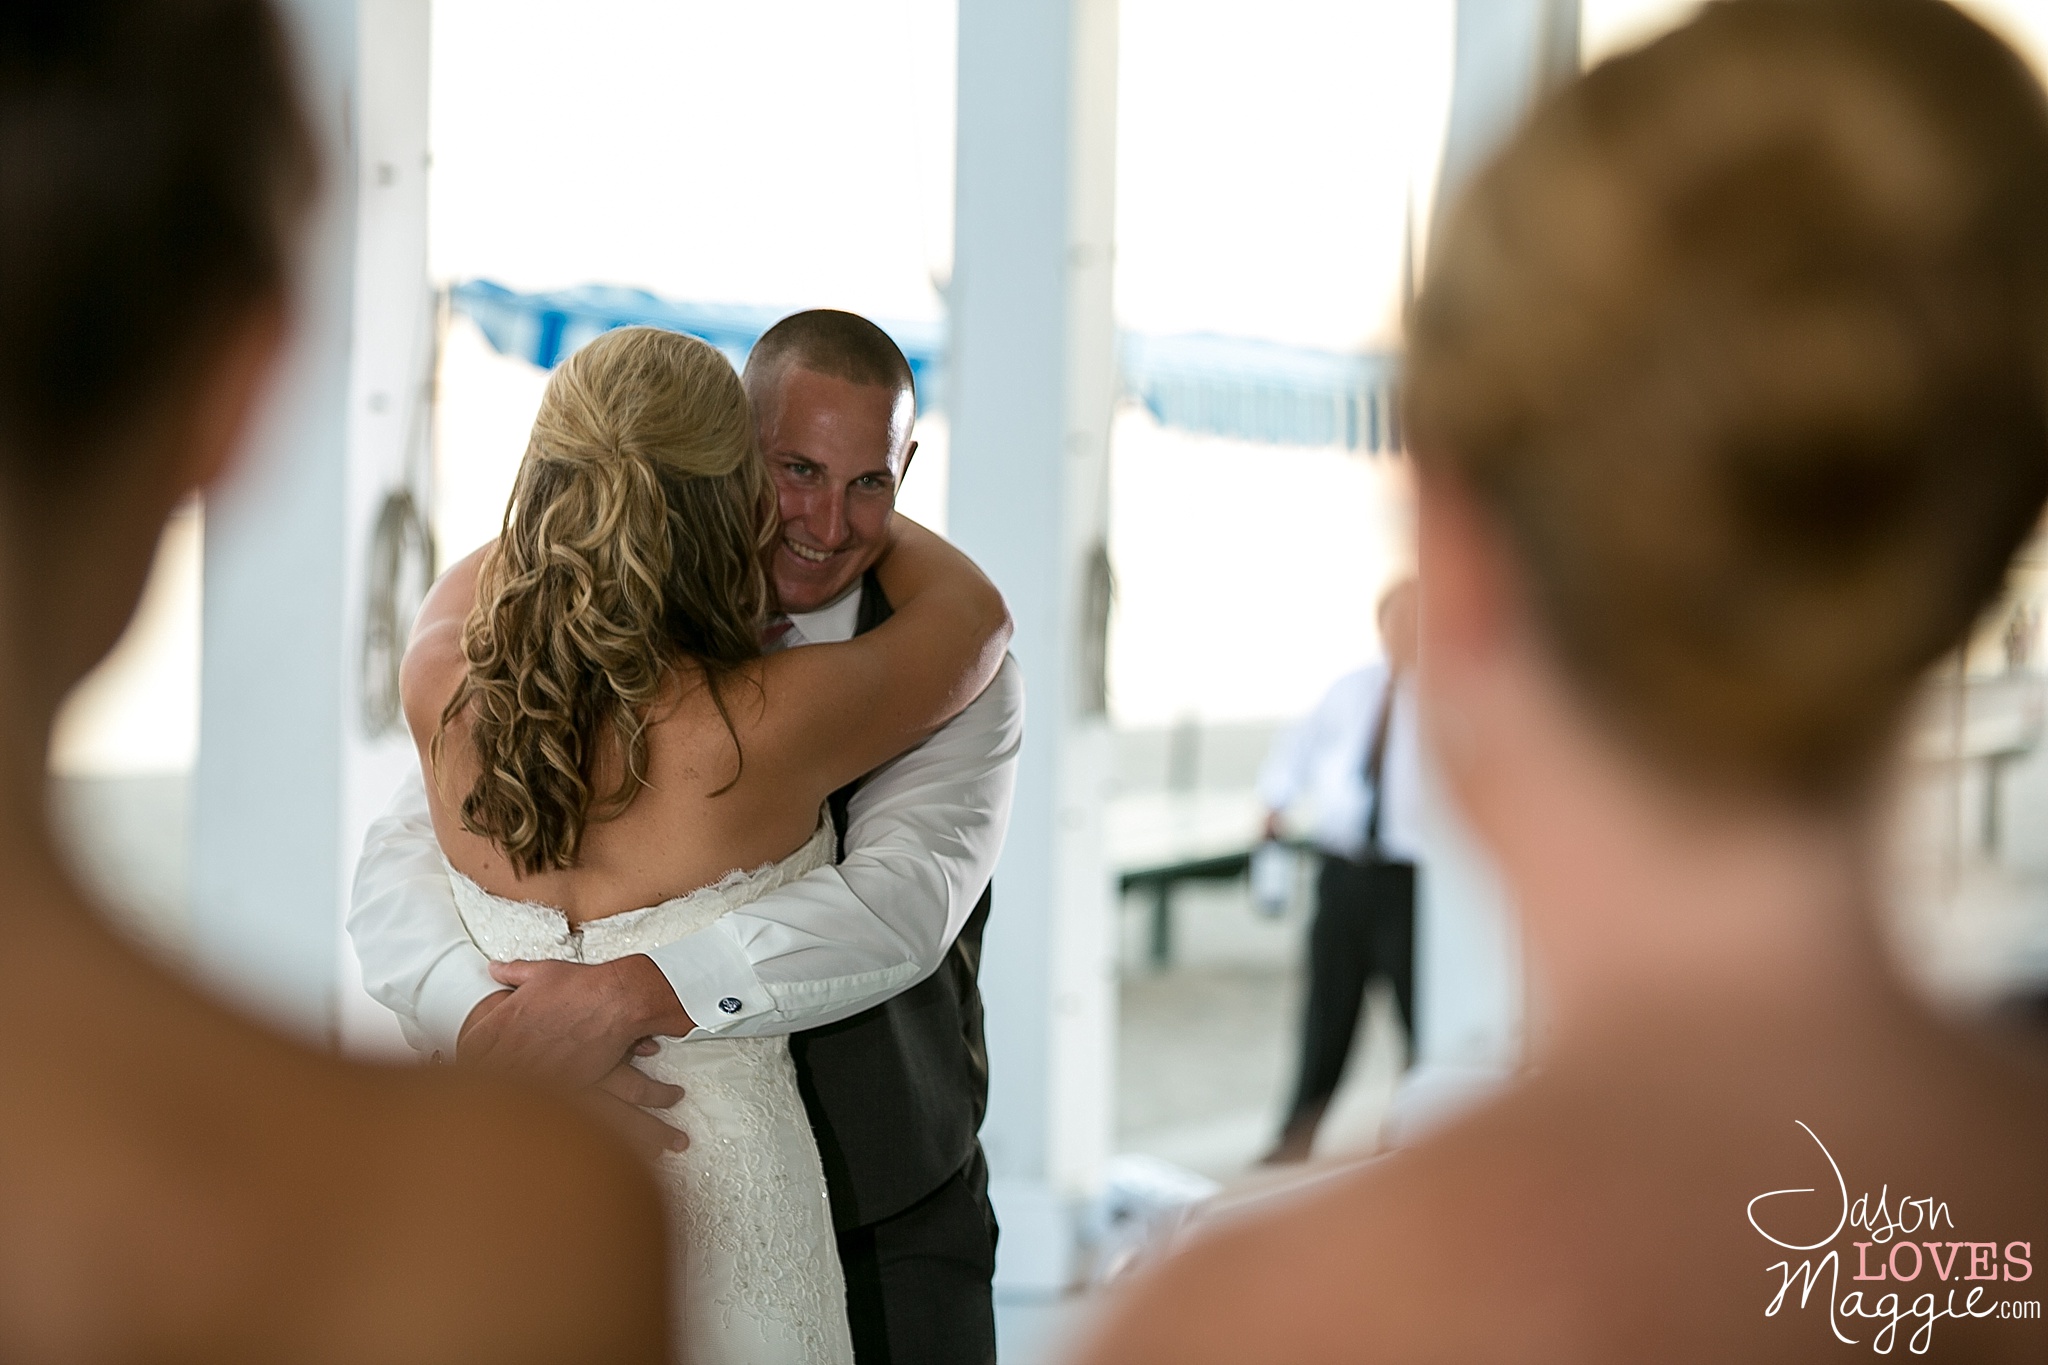 Playful Wedding, Fairfield Beach Club. Jason & Maggie Henriques, Outdoor Wedding Photographers for playful couples that celebrate intimacy, and live spontaneously.